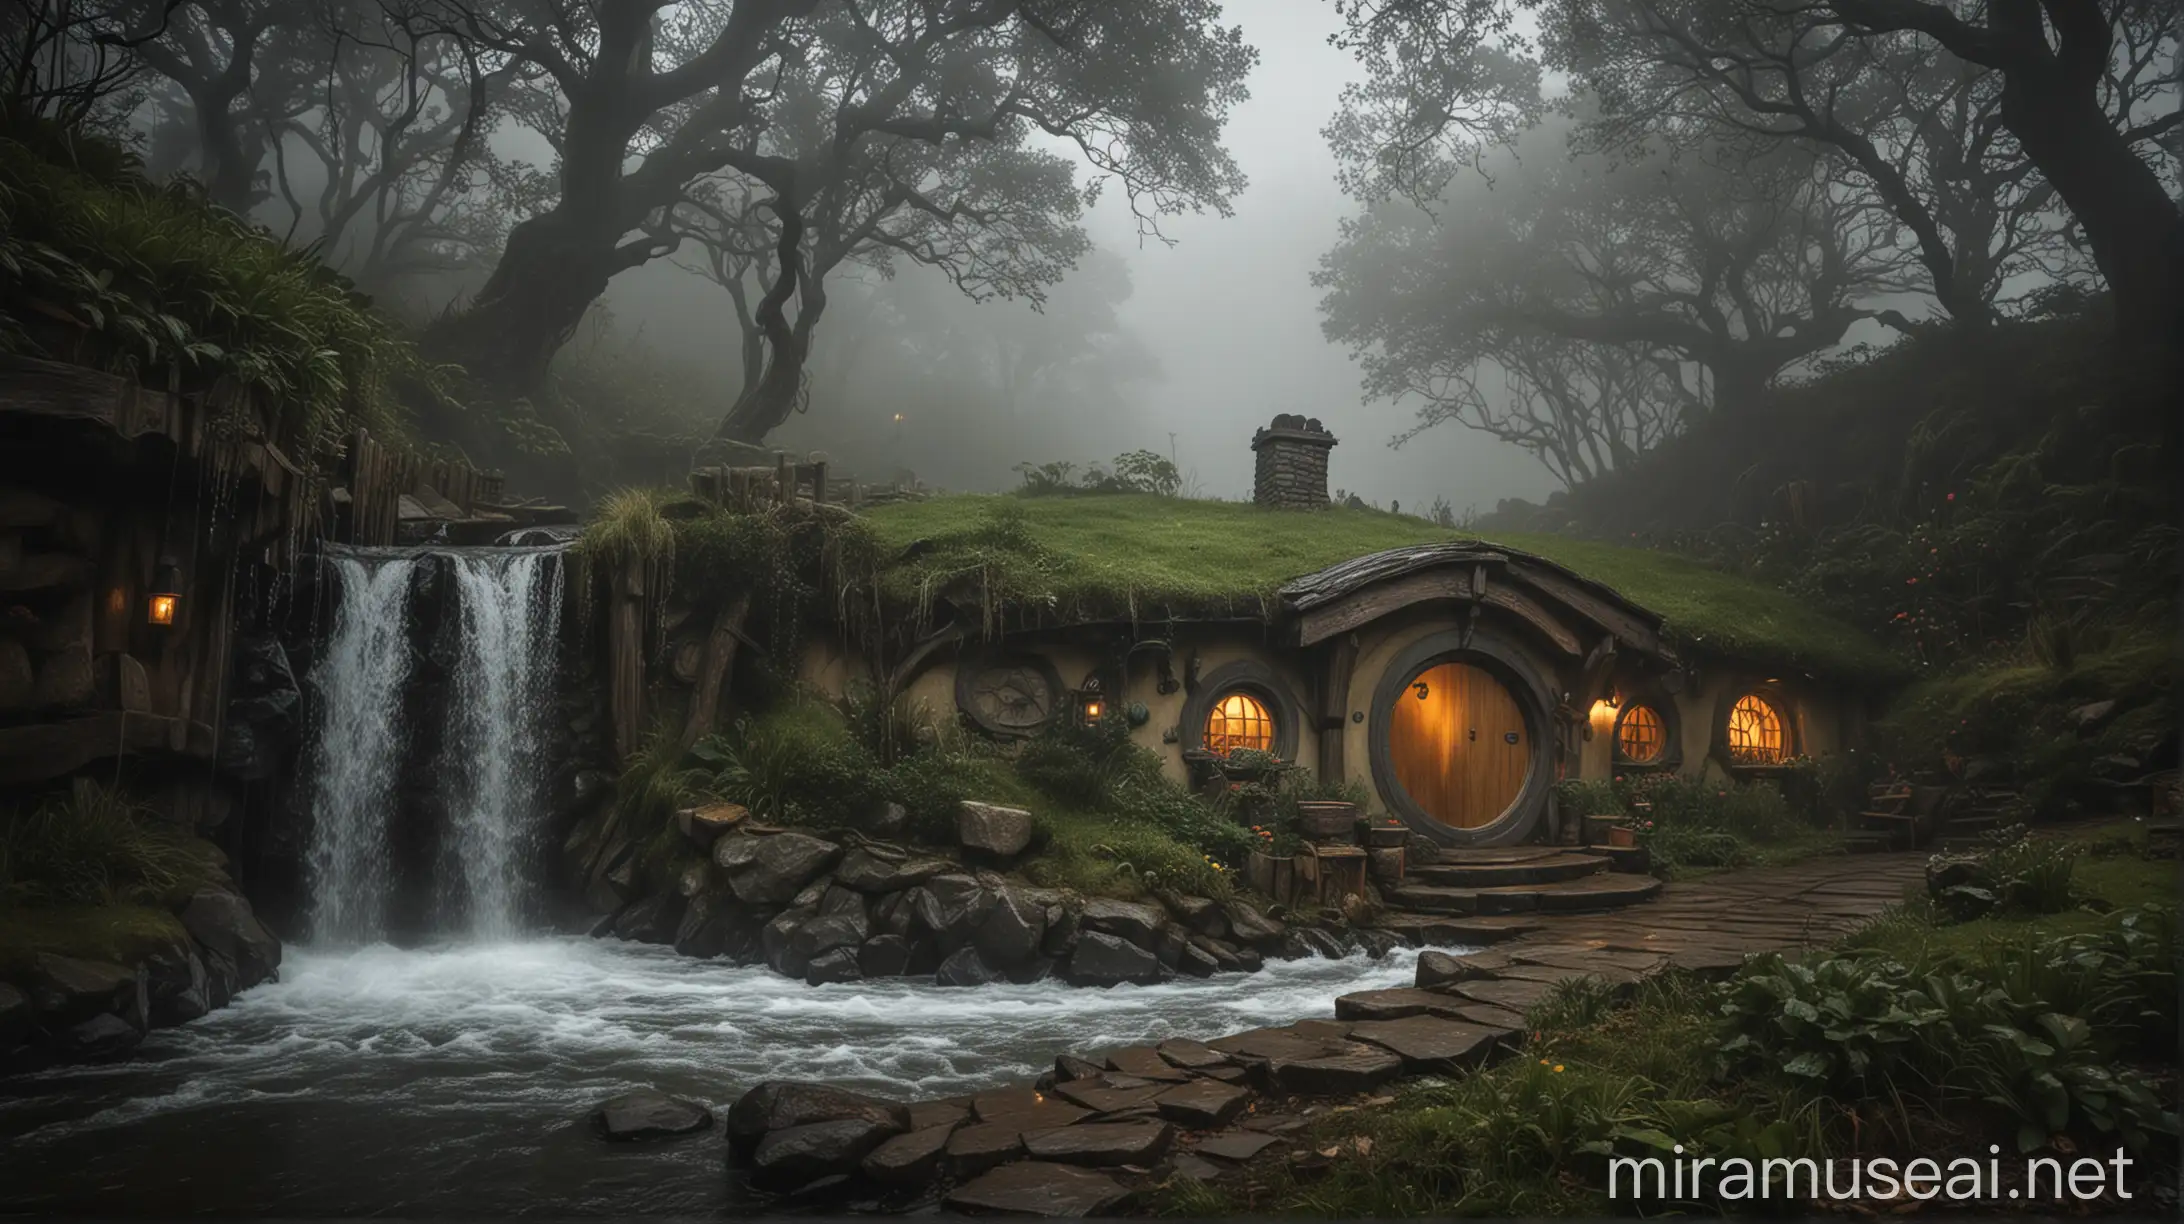 Enchanting Hobbit House Photography Dark Night in Deep Forest with Bright Interior Lighting and Waterfall